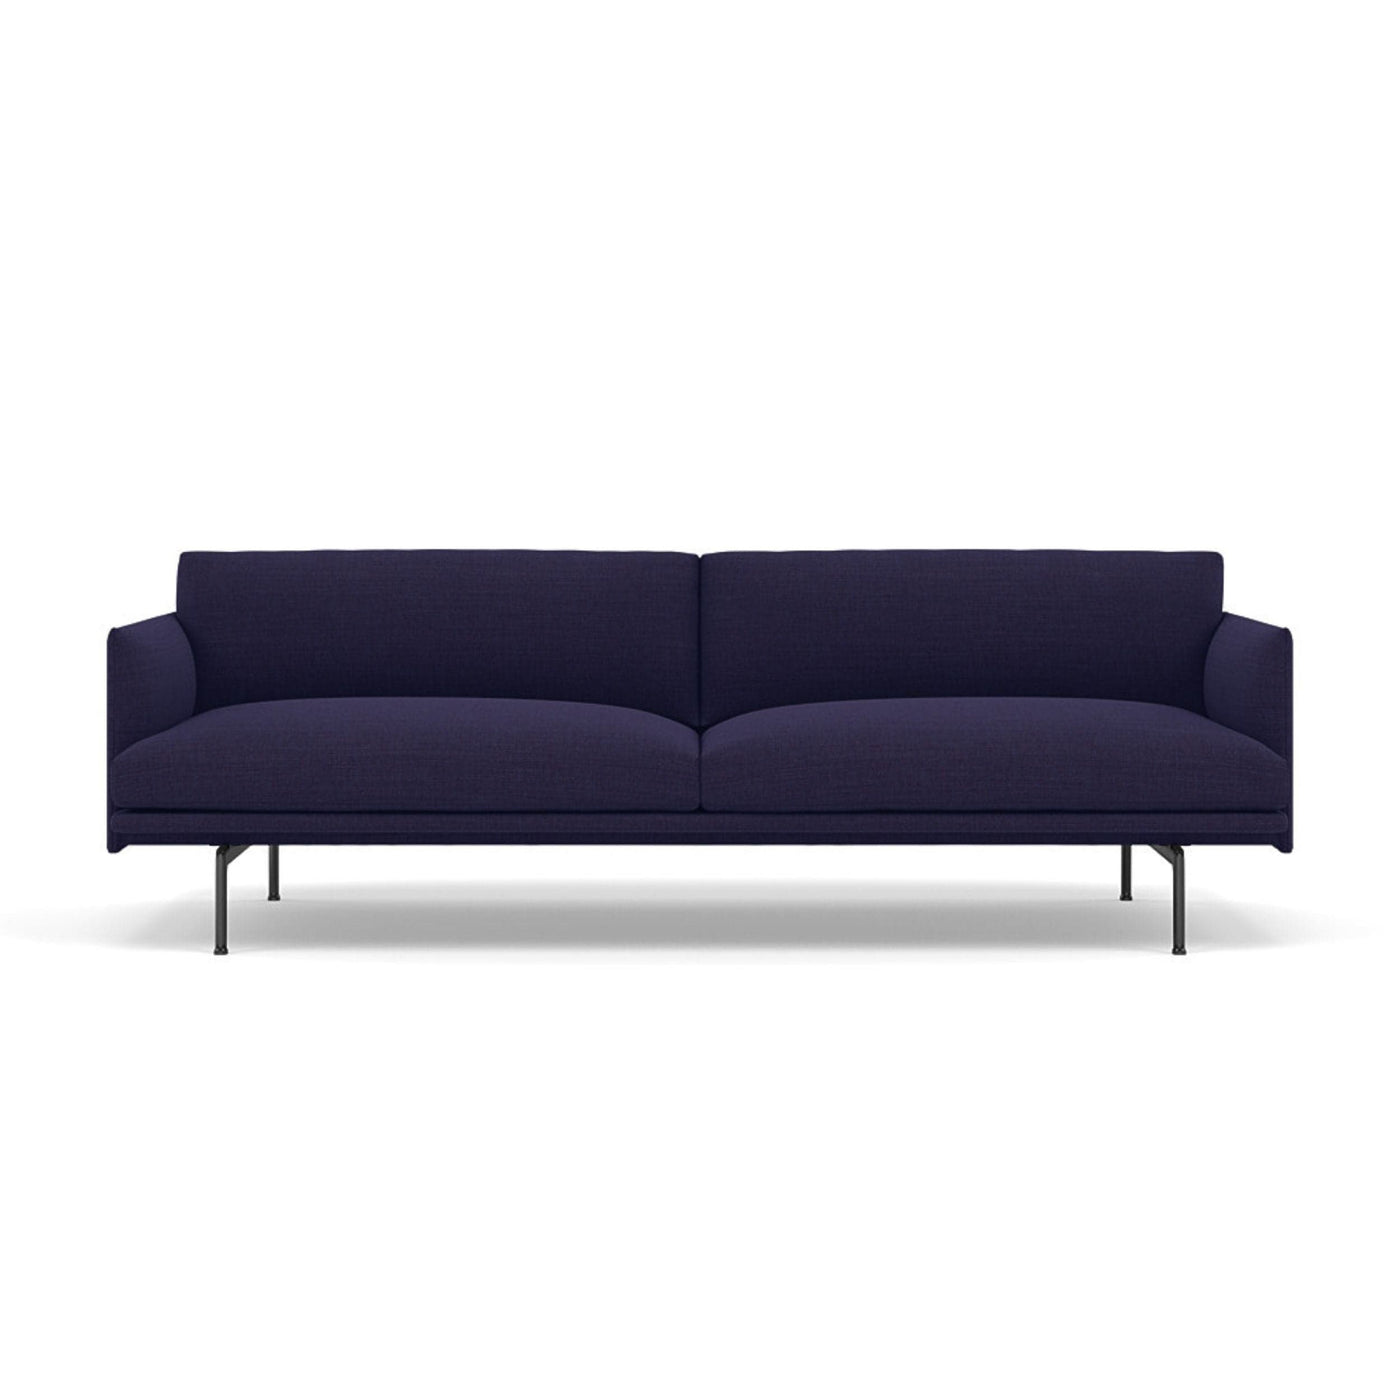 Muuto Outline 3 seater sofa with black legs. Available from someday designs. #colour_canvas-684-blue